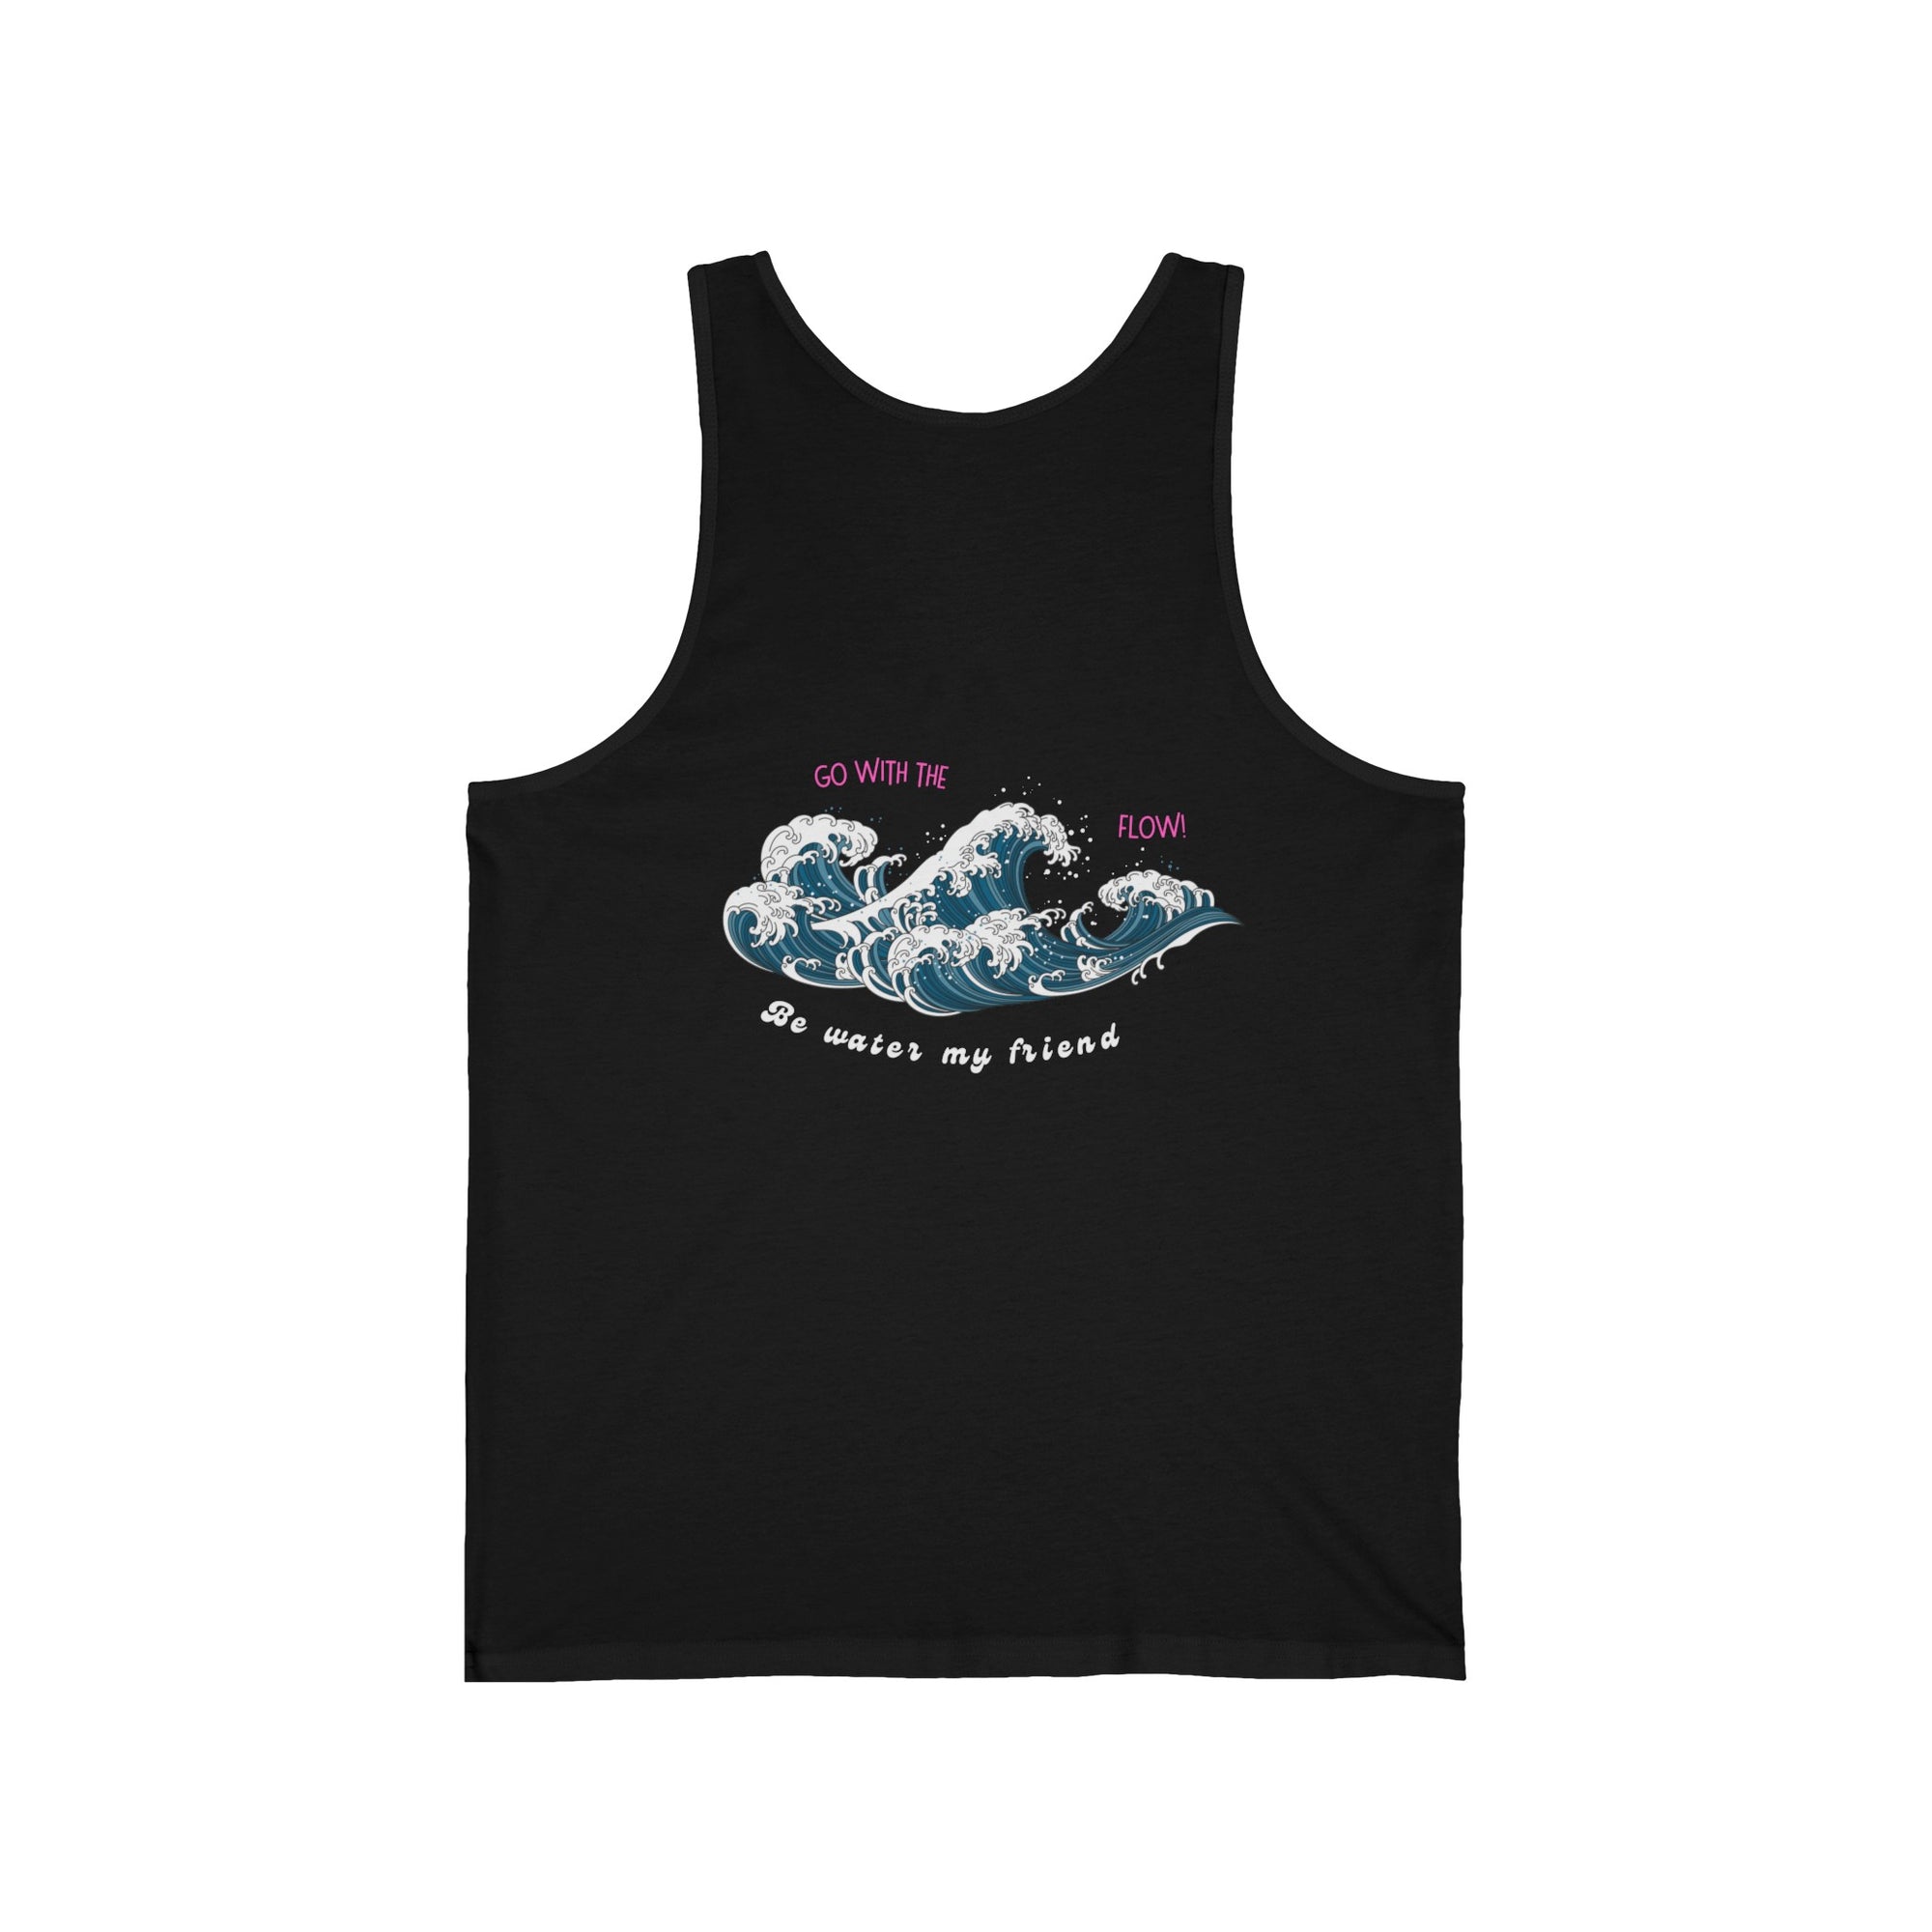 Unisex Element5 Go with the flow tank